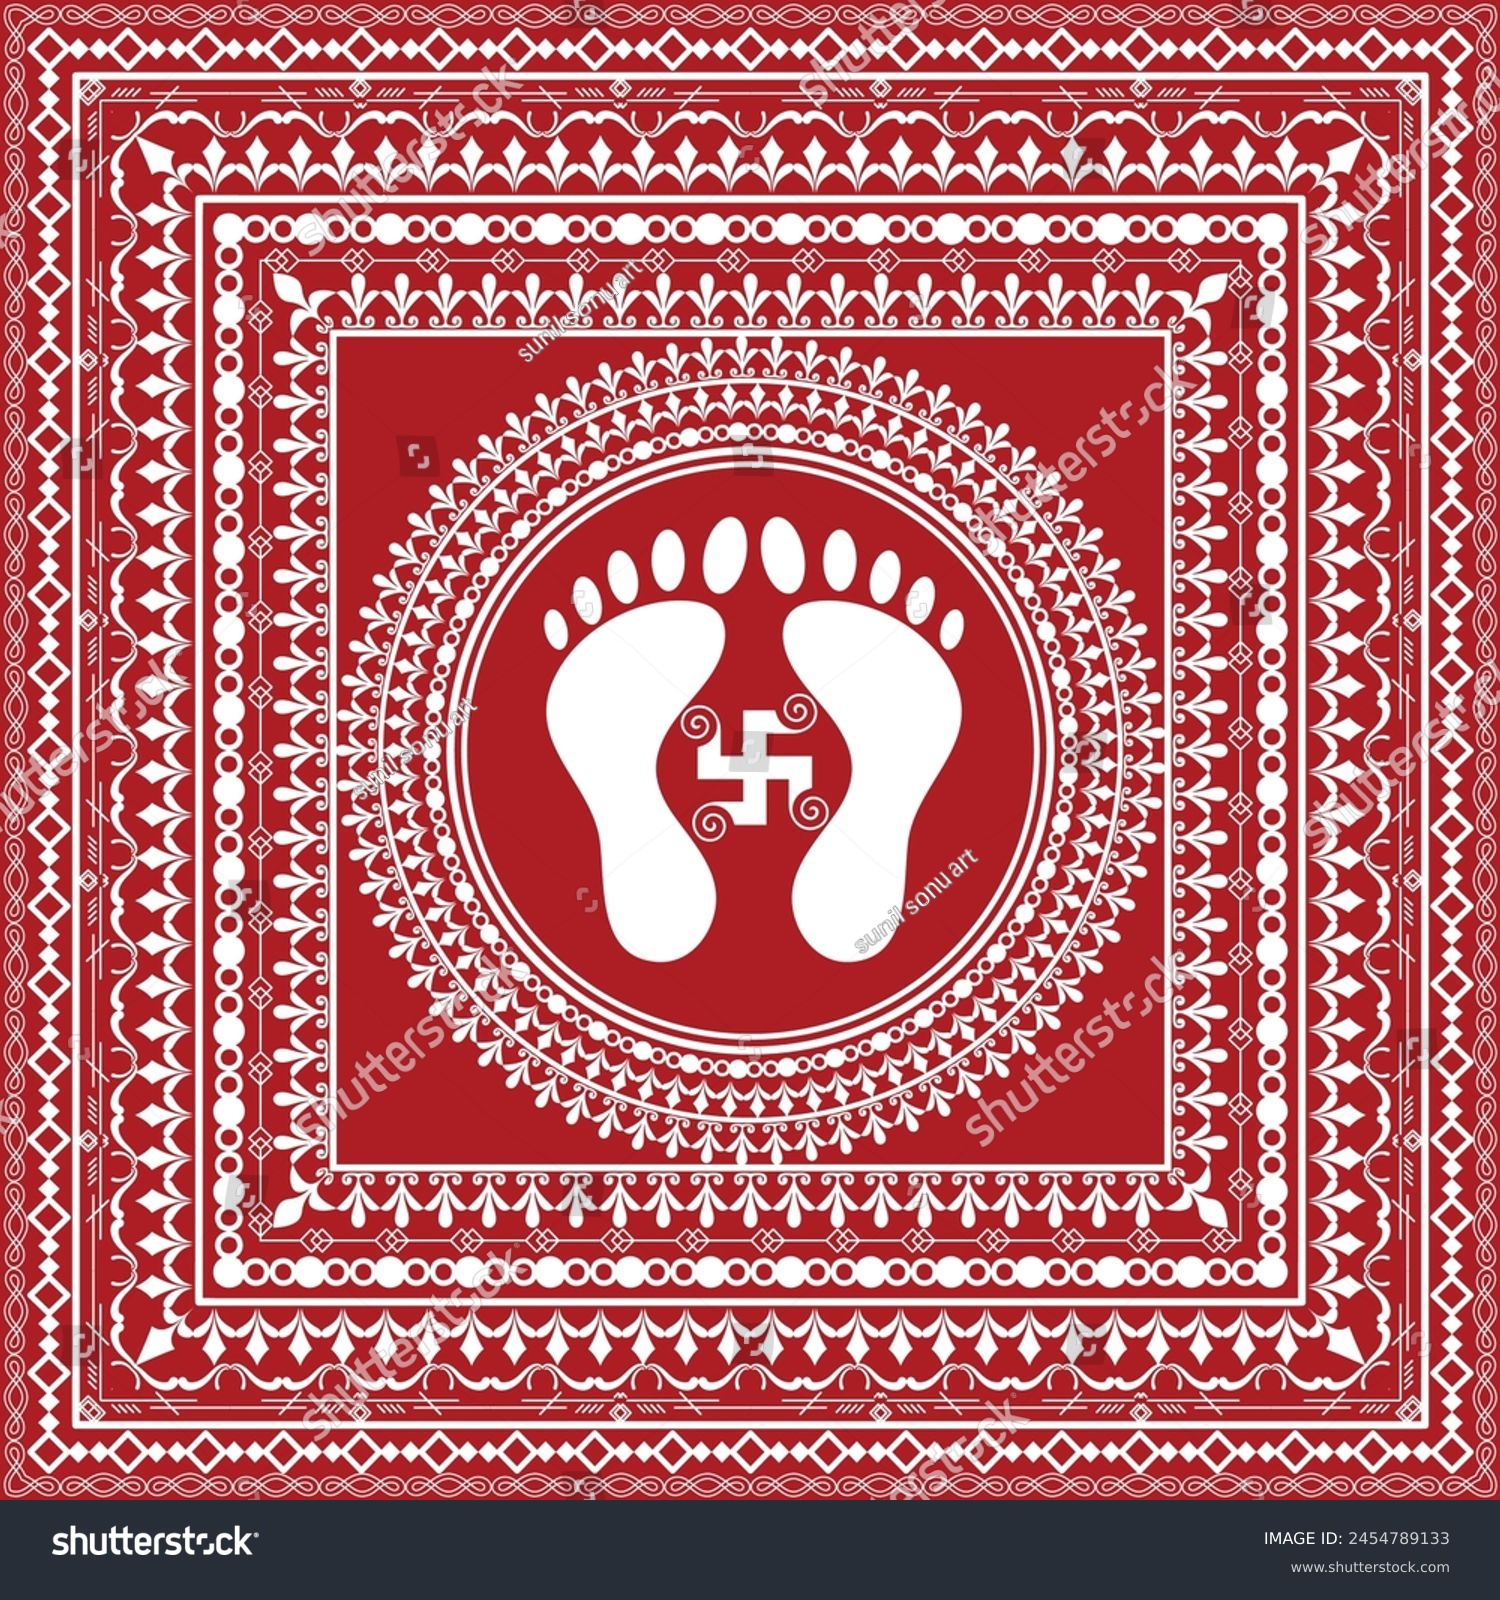 SVG of Aipan Design pattern for india festival vector red and white color svg